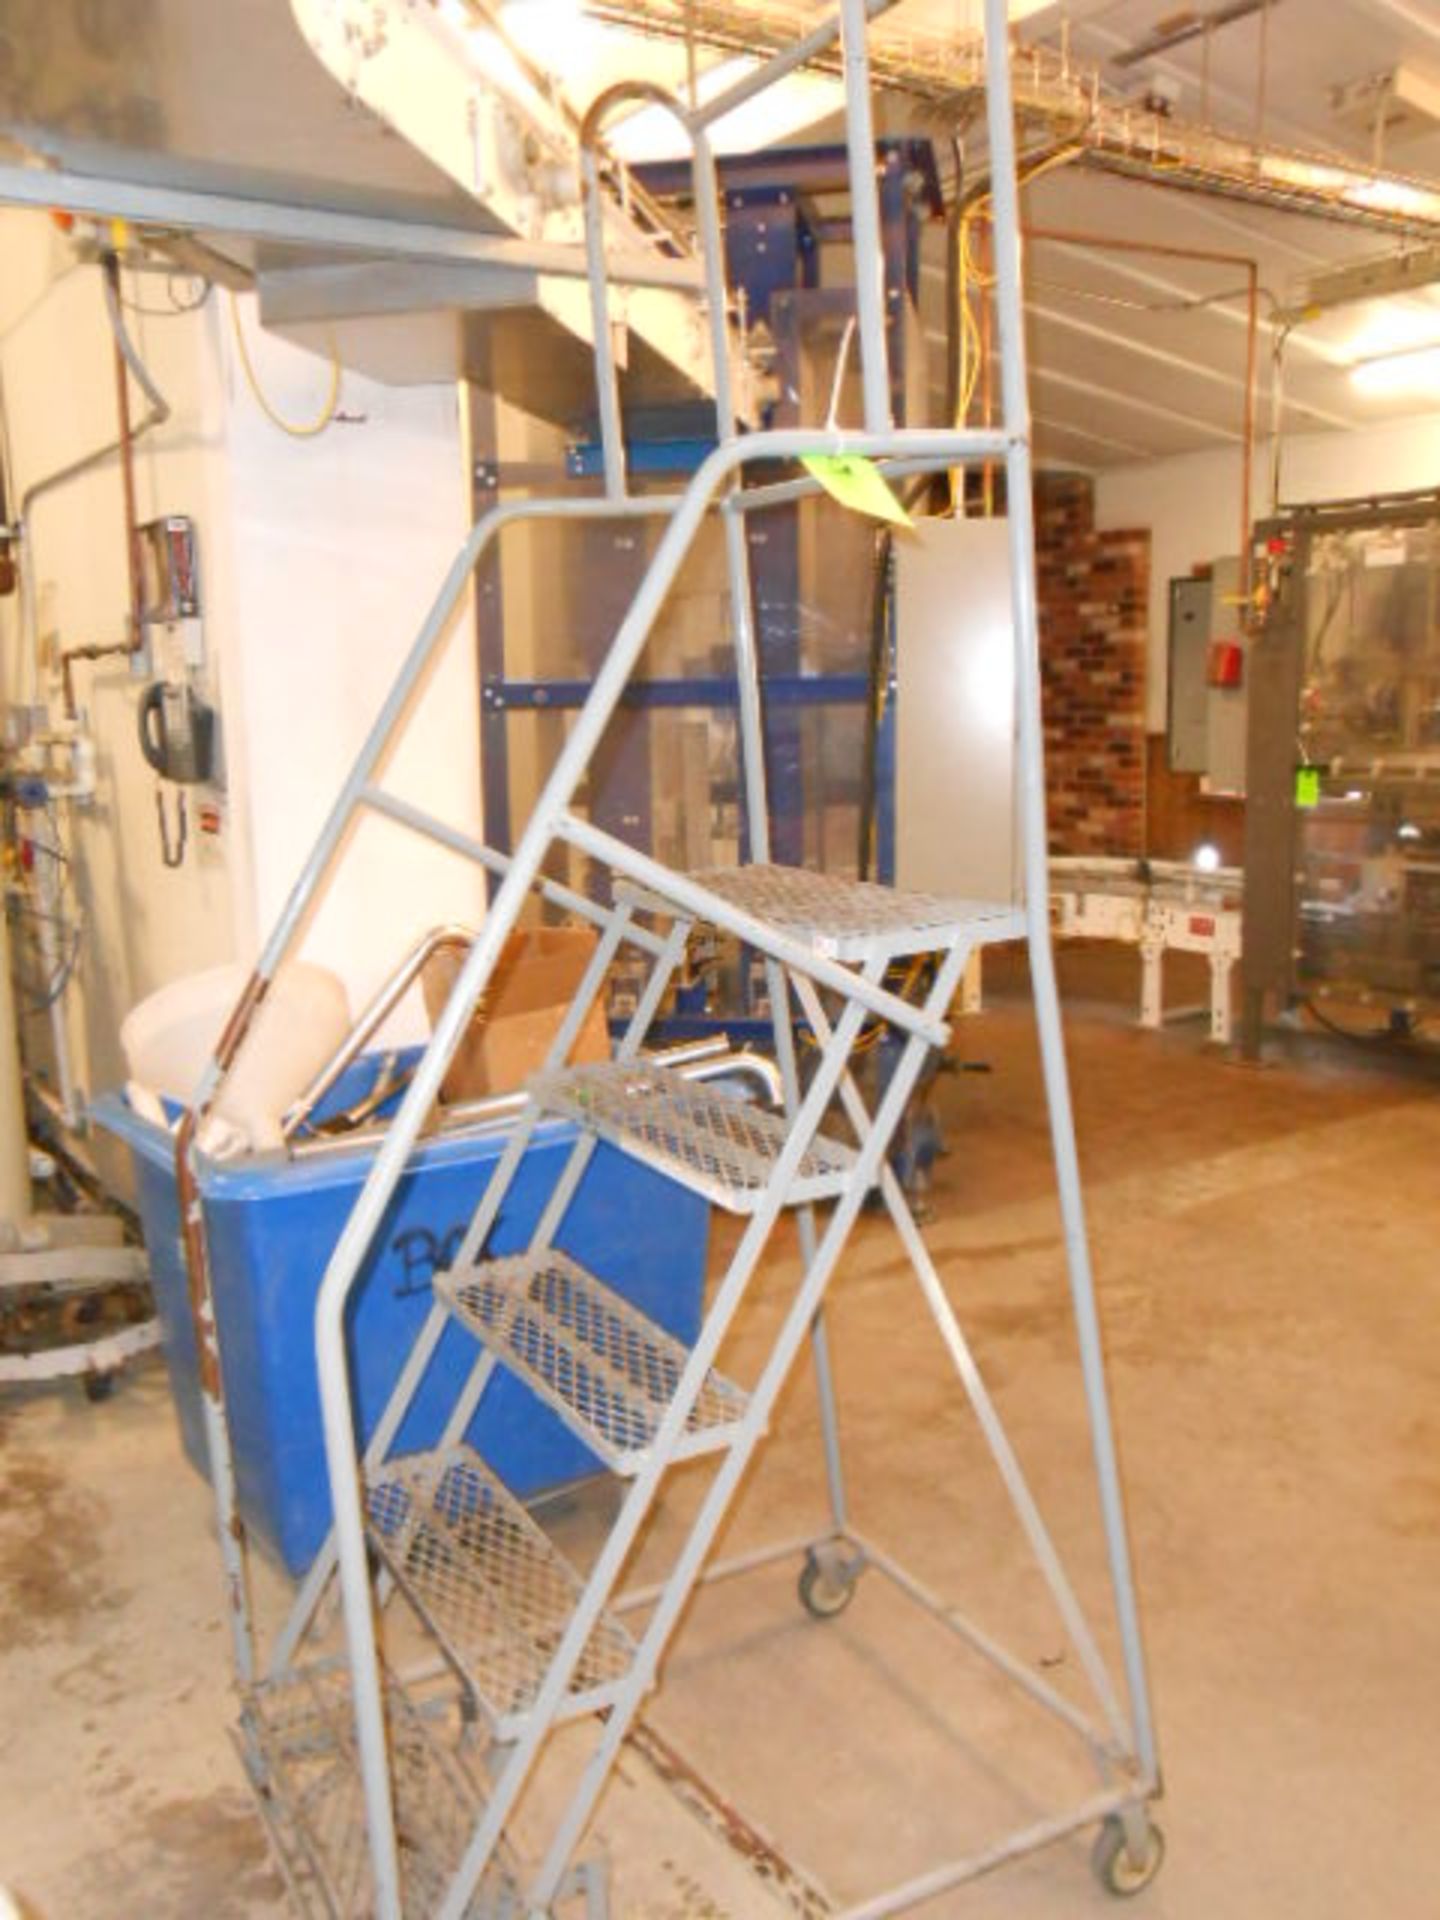 Metal construction portable stair, 50 in hgt __LOCATED: MAIN CIDERY CP-1C AREA ***NOTE FROM